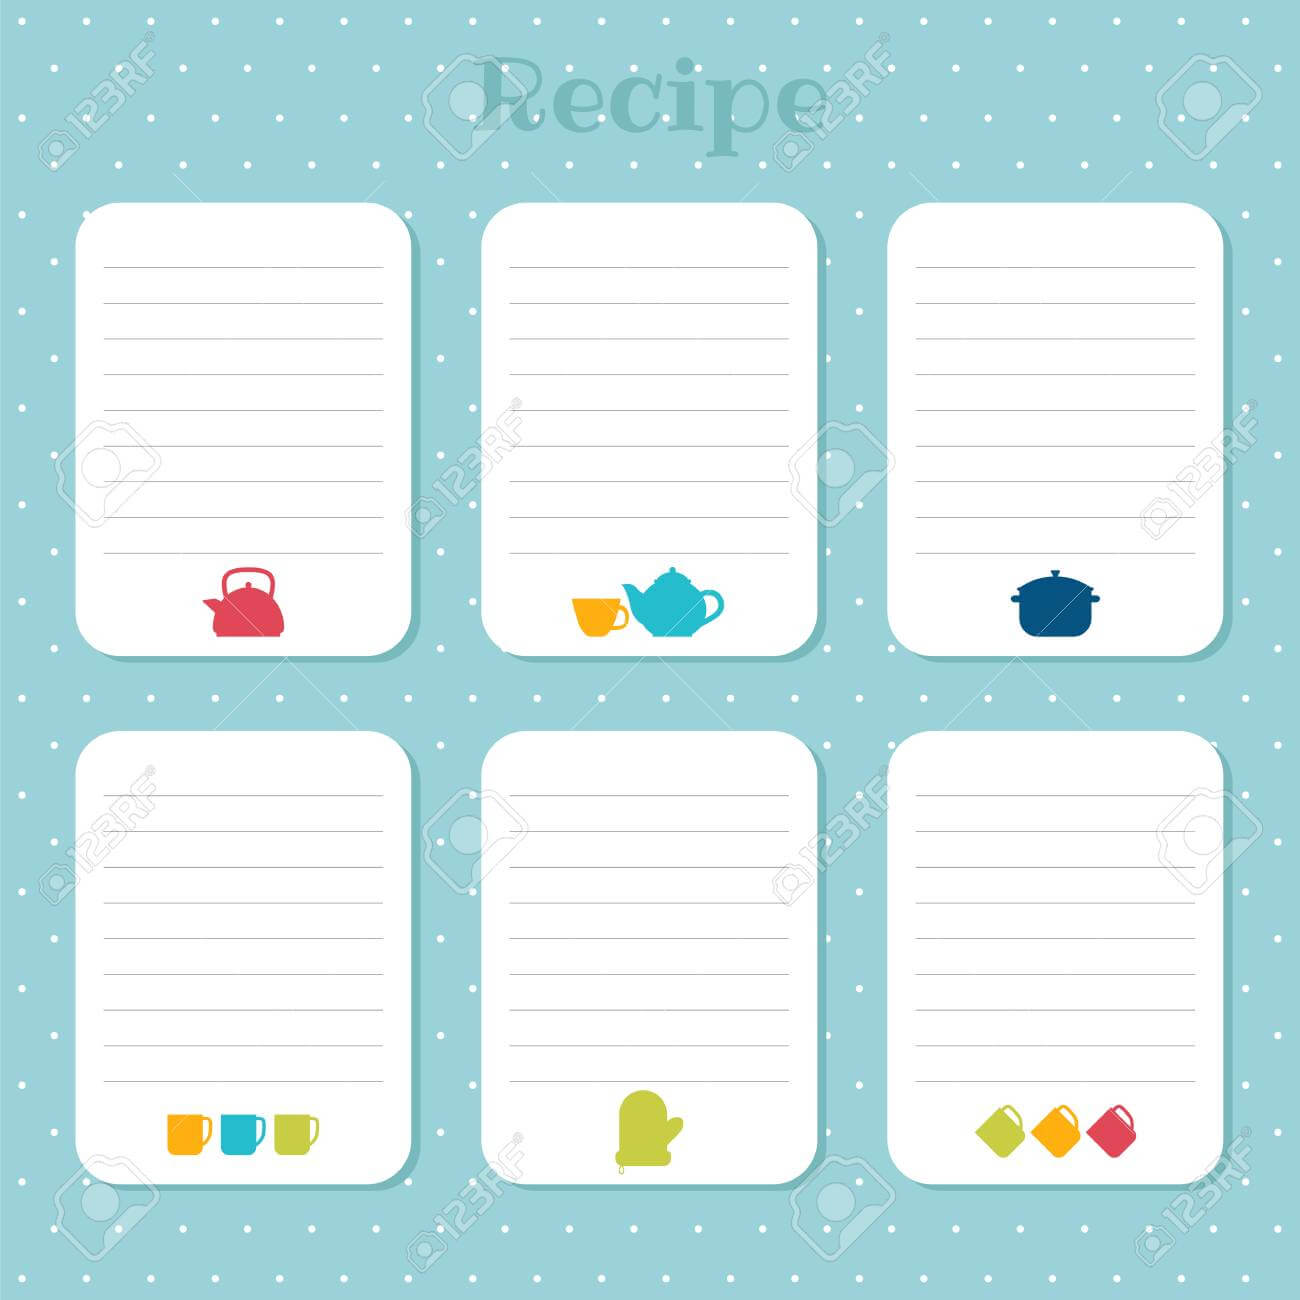 Recipe Cards Set. Cooking Card Templates. For Restaurant, Cafe,.. Throughout Restaurant Recipe Card Template